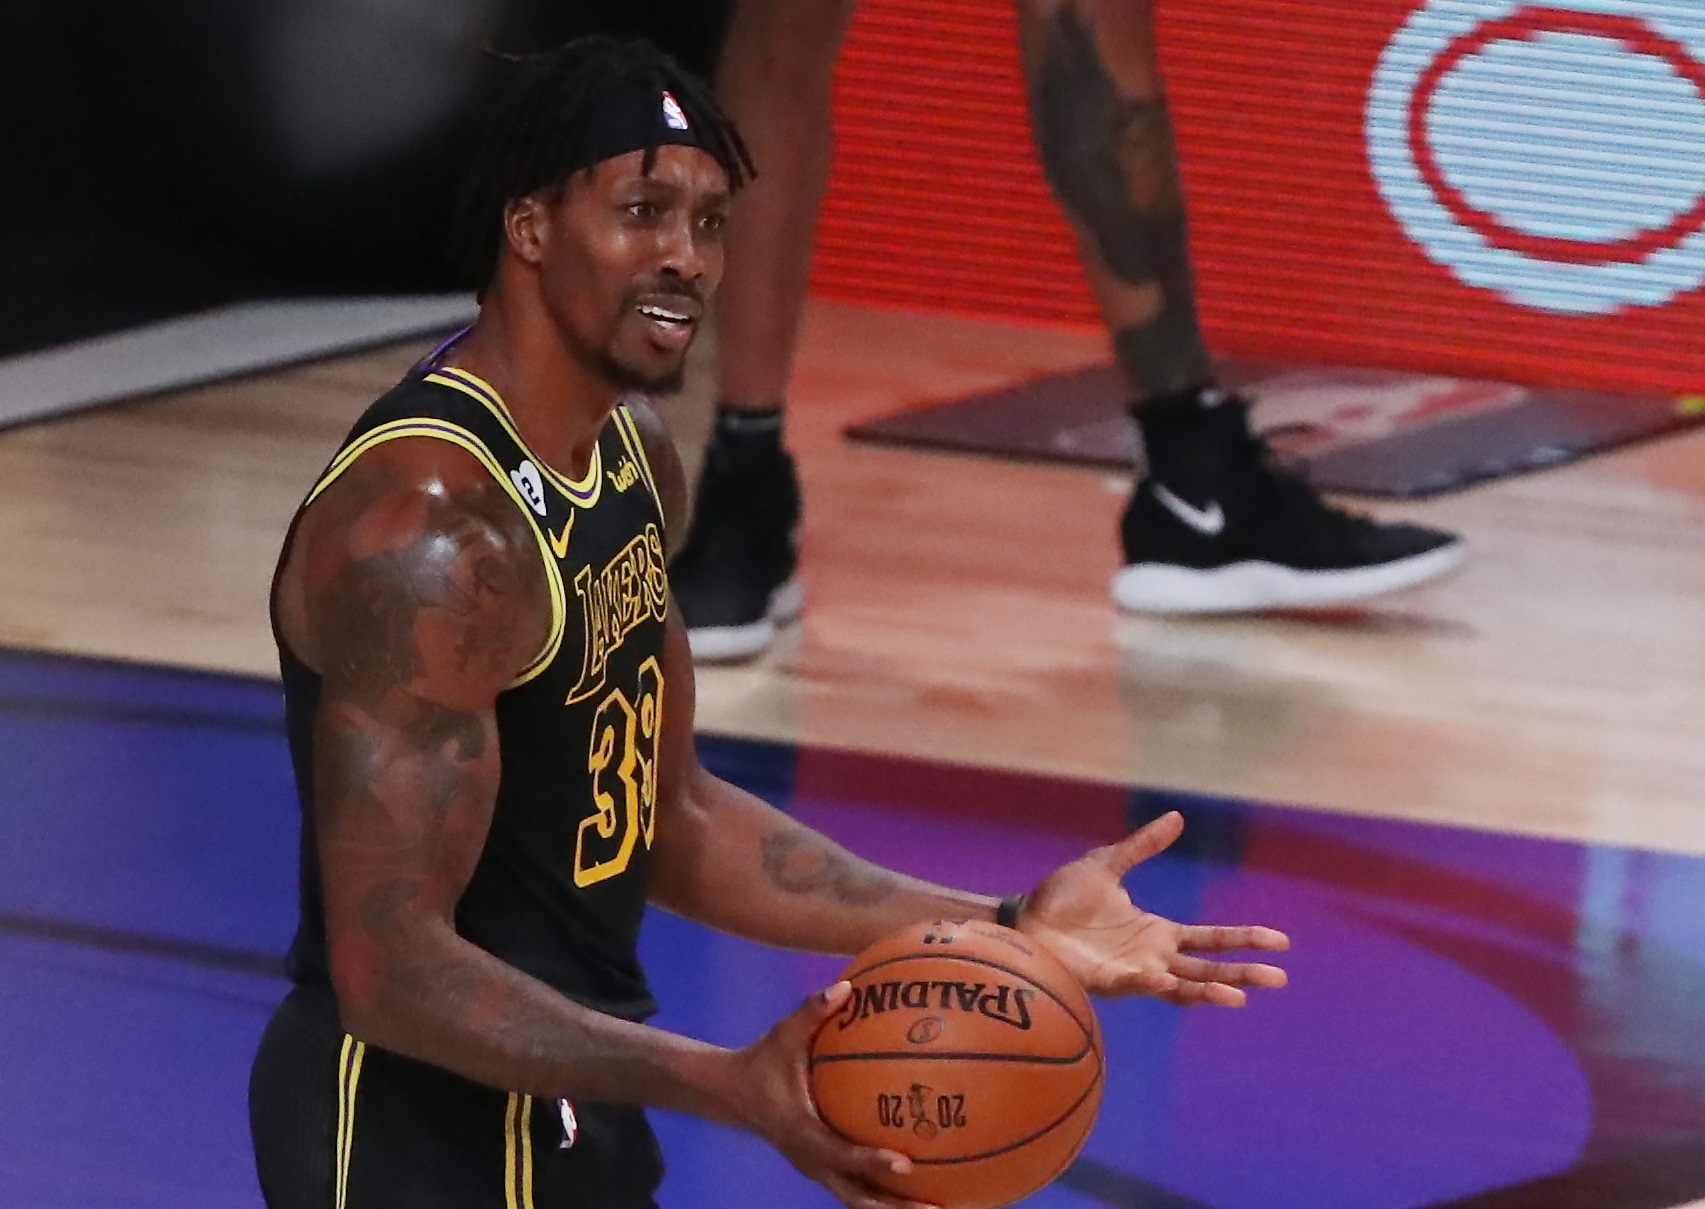 Dwight Howard Stiffed 2 Women Who Cared for His Massive Snake, Lawsuit Alleges